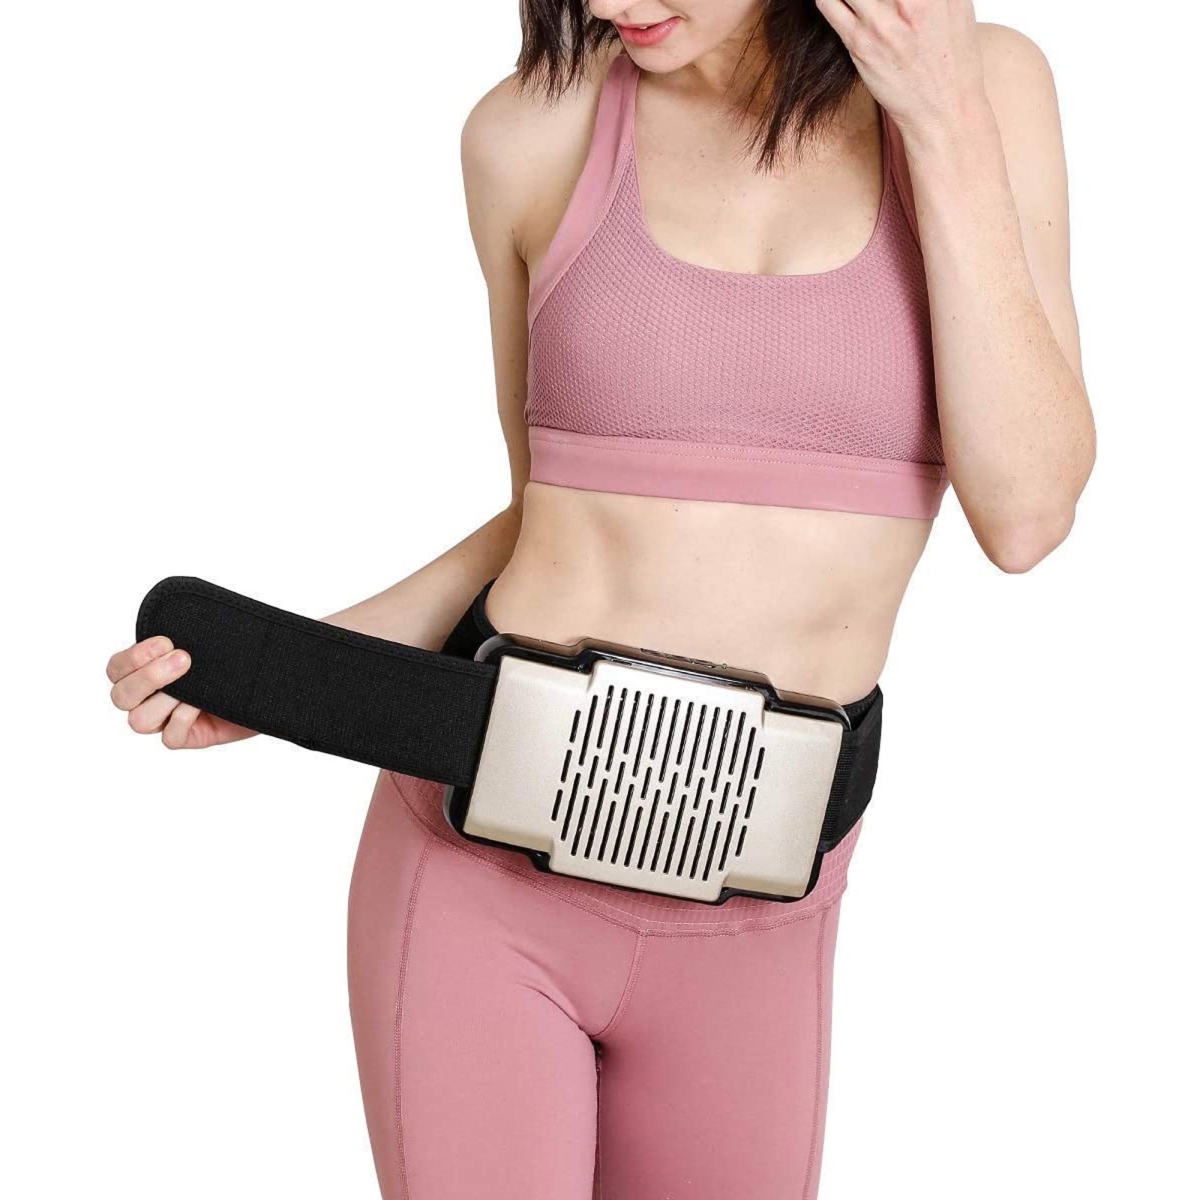 Picture of Dr Pillow BK3463 EcoFreezer Fat Freezing Belt-Home Cryolipolysis Sculpting Fat Freezing Device